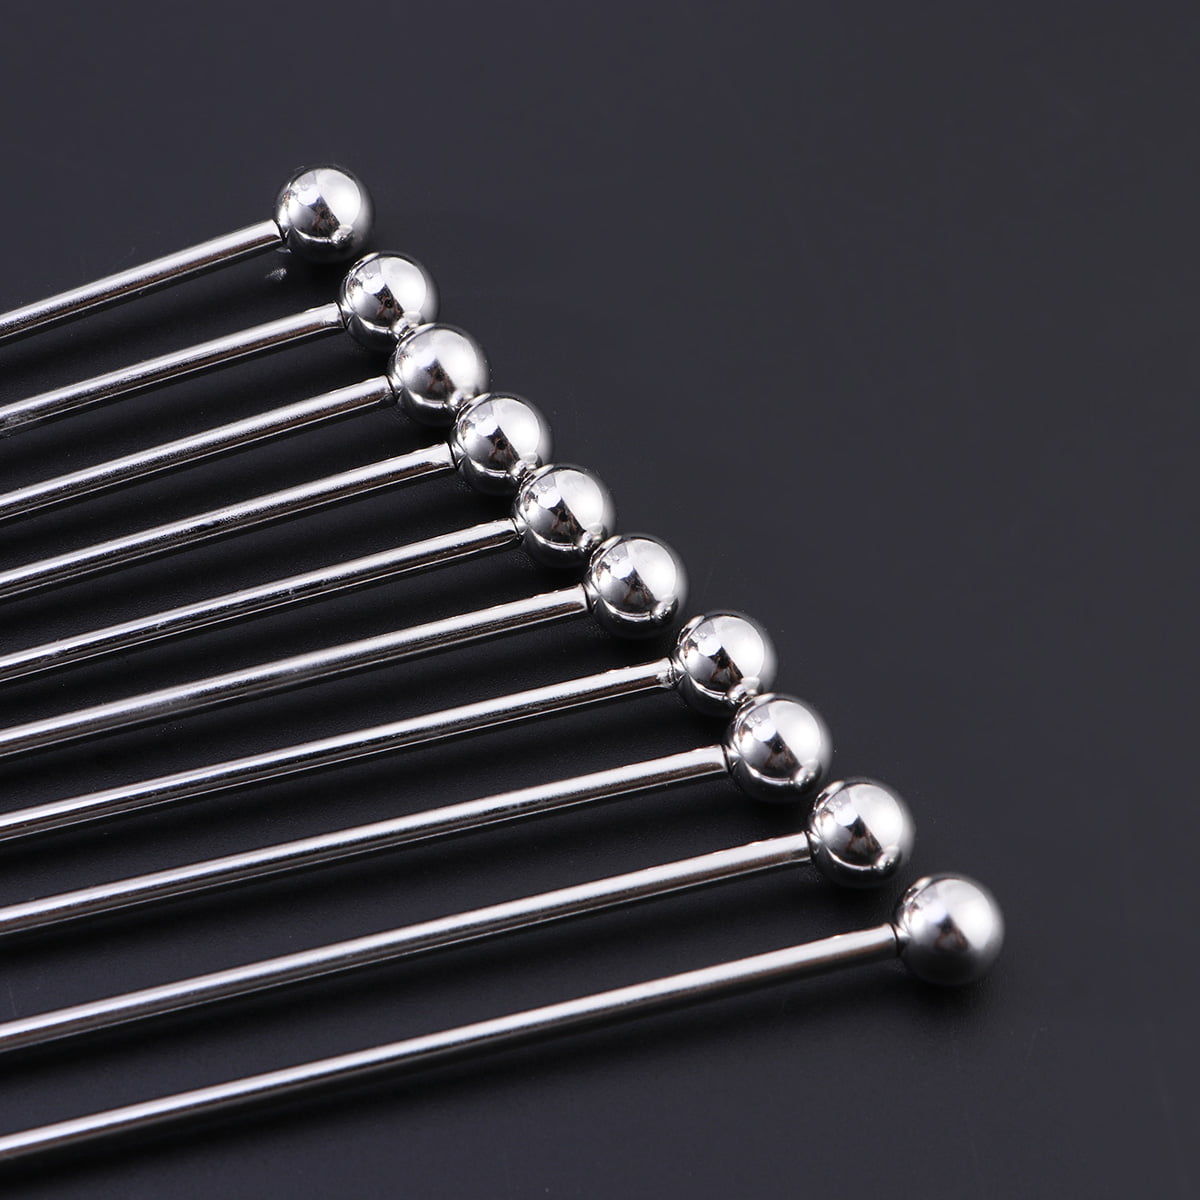 19cm Creative Stainless Steel Mixing Cocktail Coffee Stirrers for